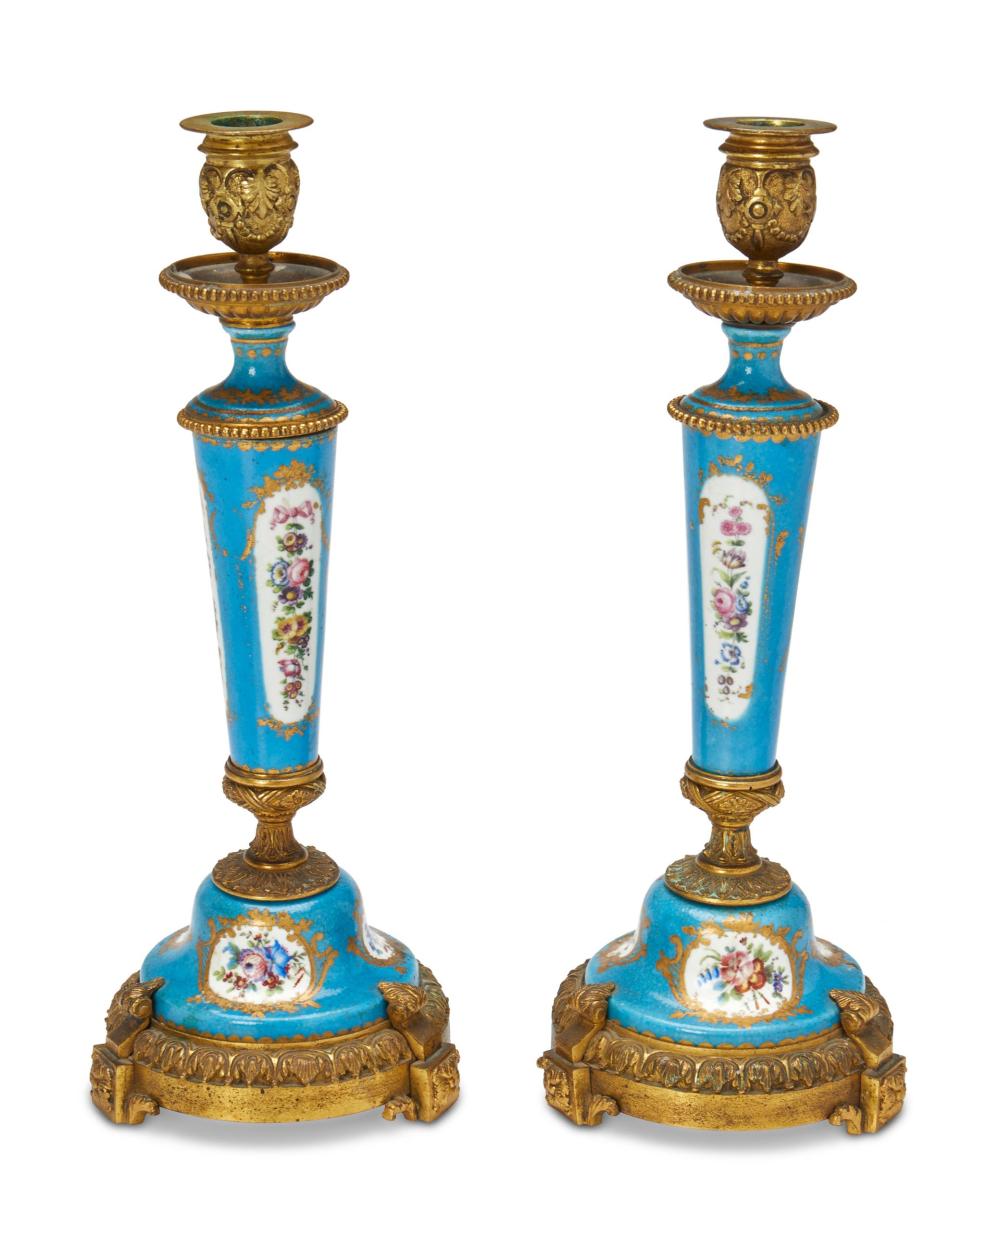 A PAIR OF SEVRES-STYLE PORCELAIN